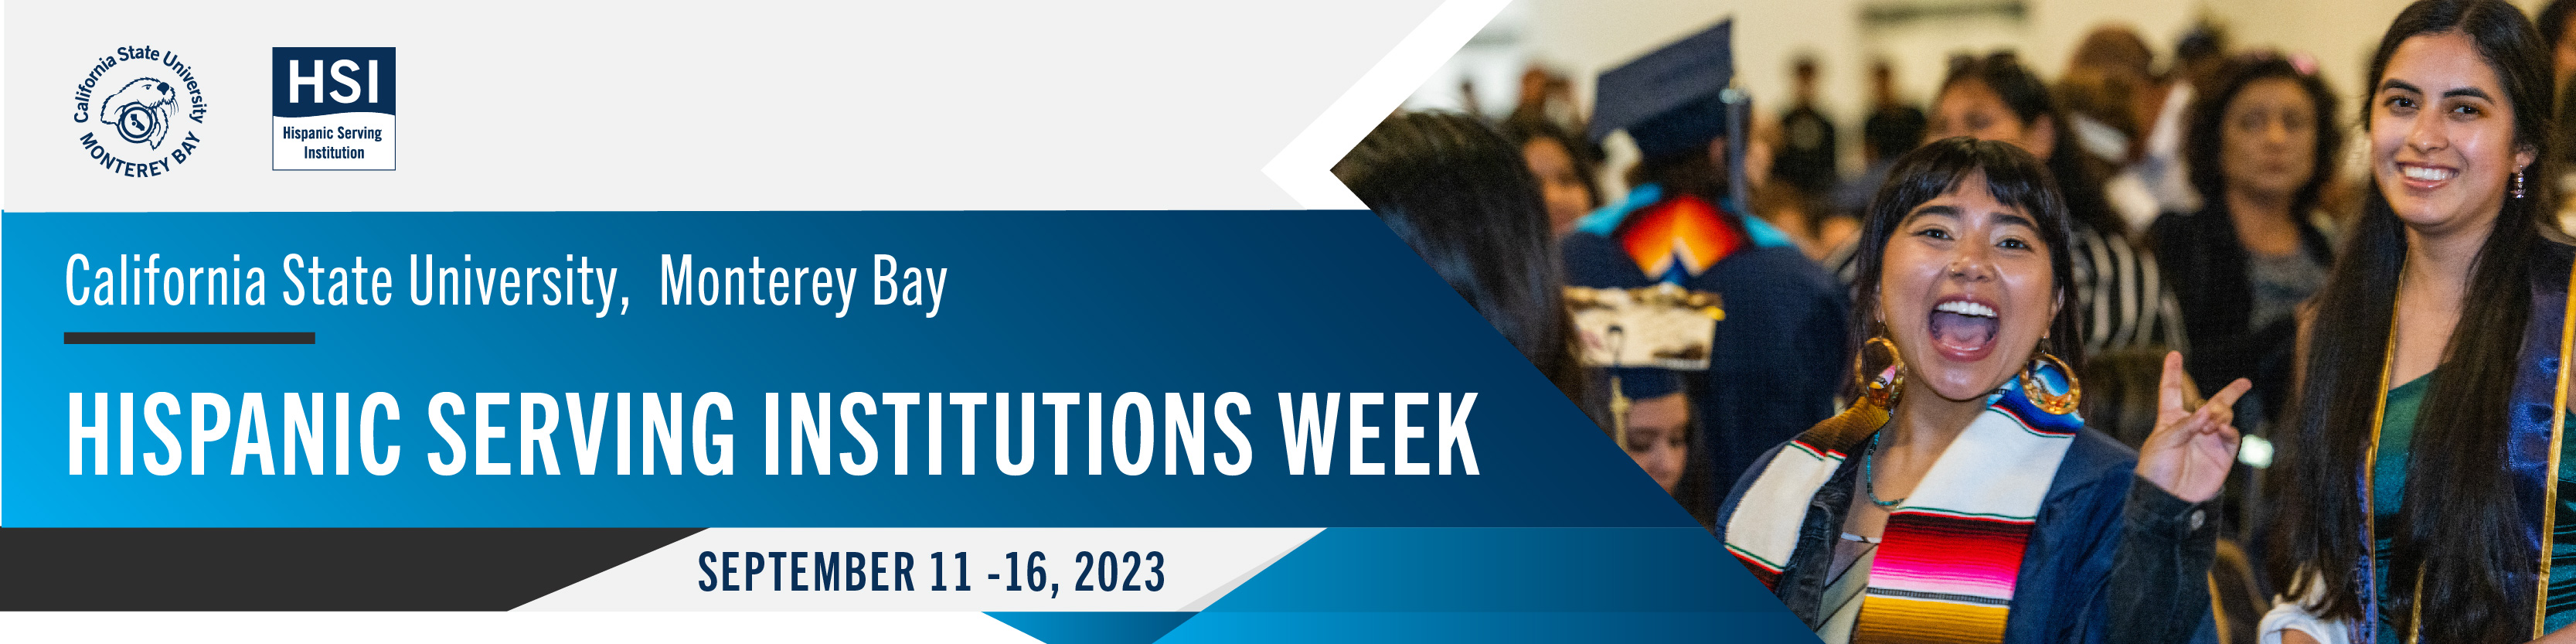 Banner image for HSI Week 2023 with dates, image on right showcasing joyful students from the 2023 Chicanx/Latinx Affinity Ceremony